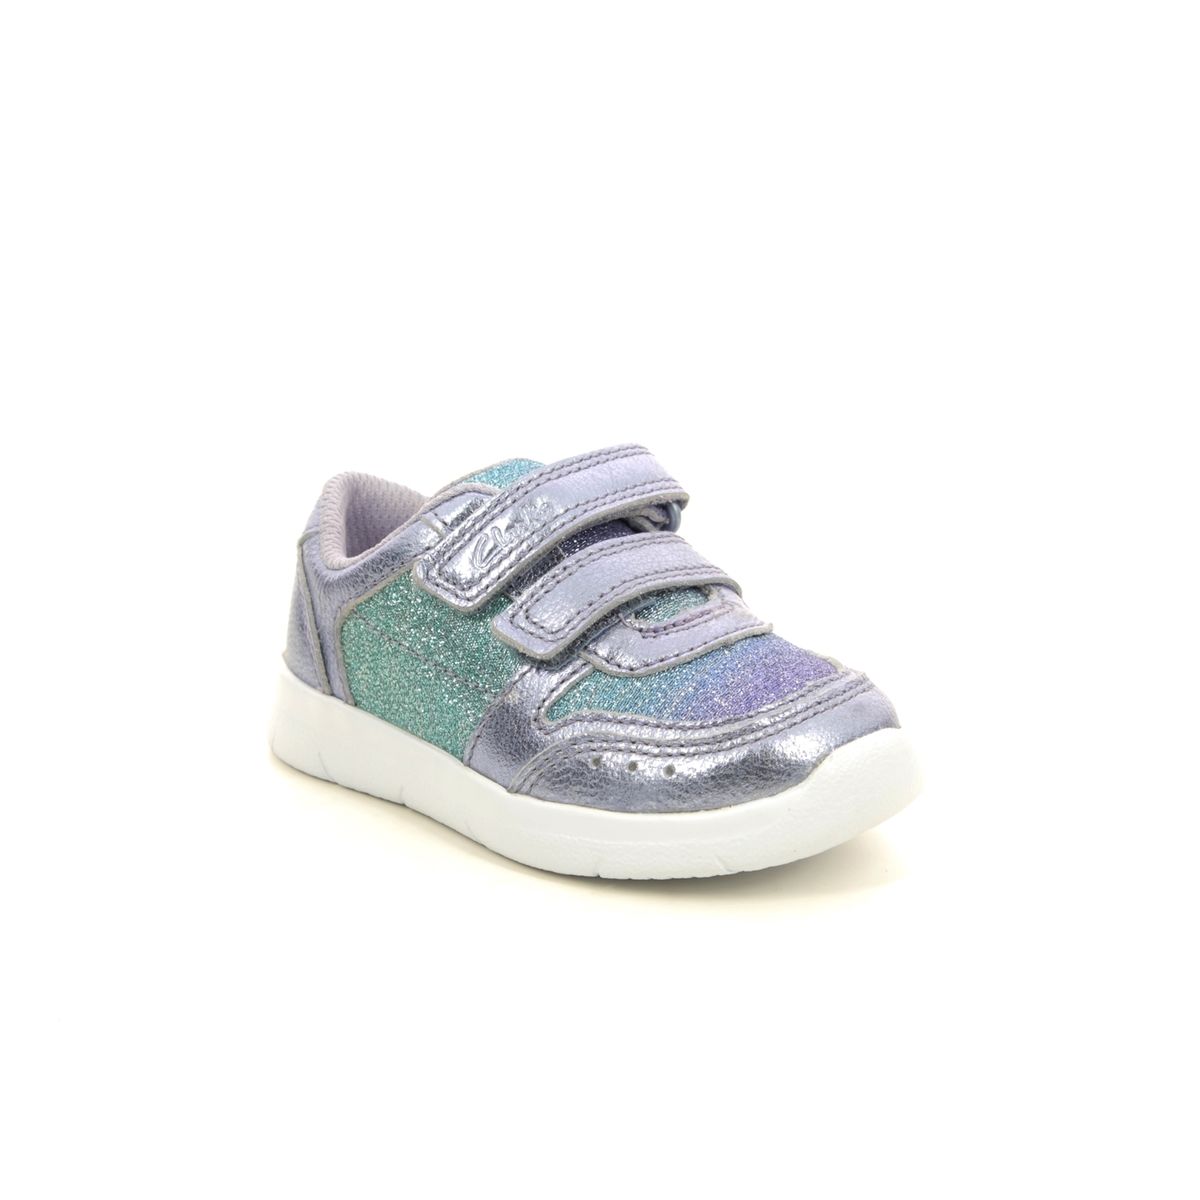 Clarks Ath Sonar T Lilac Kids Toddler Girls Trainers 541217G In Size 7.5 In Plain Lilac G Width Fitting